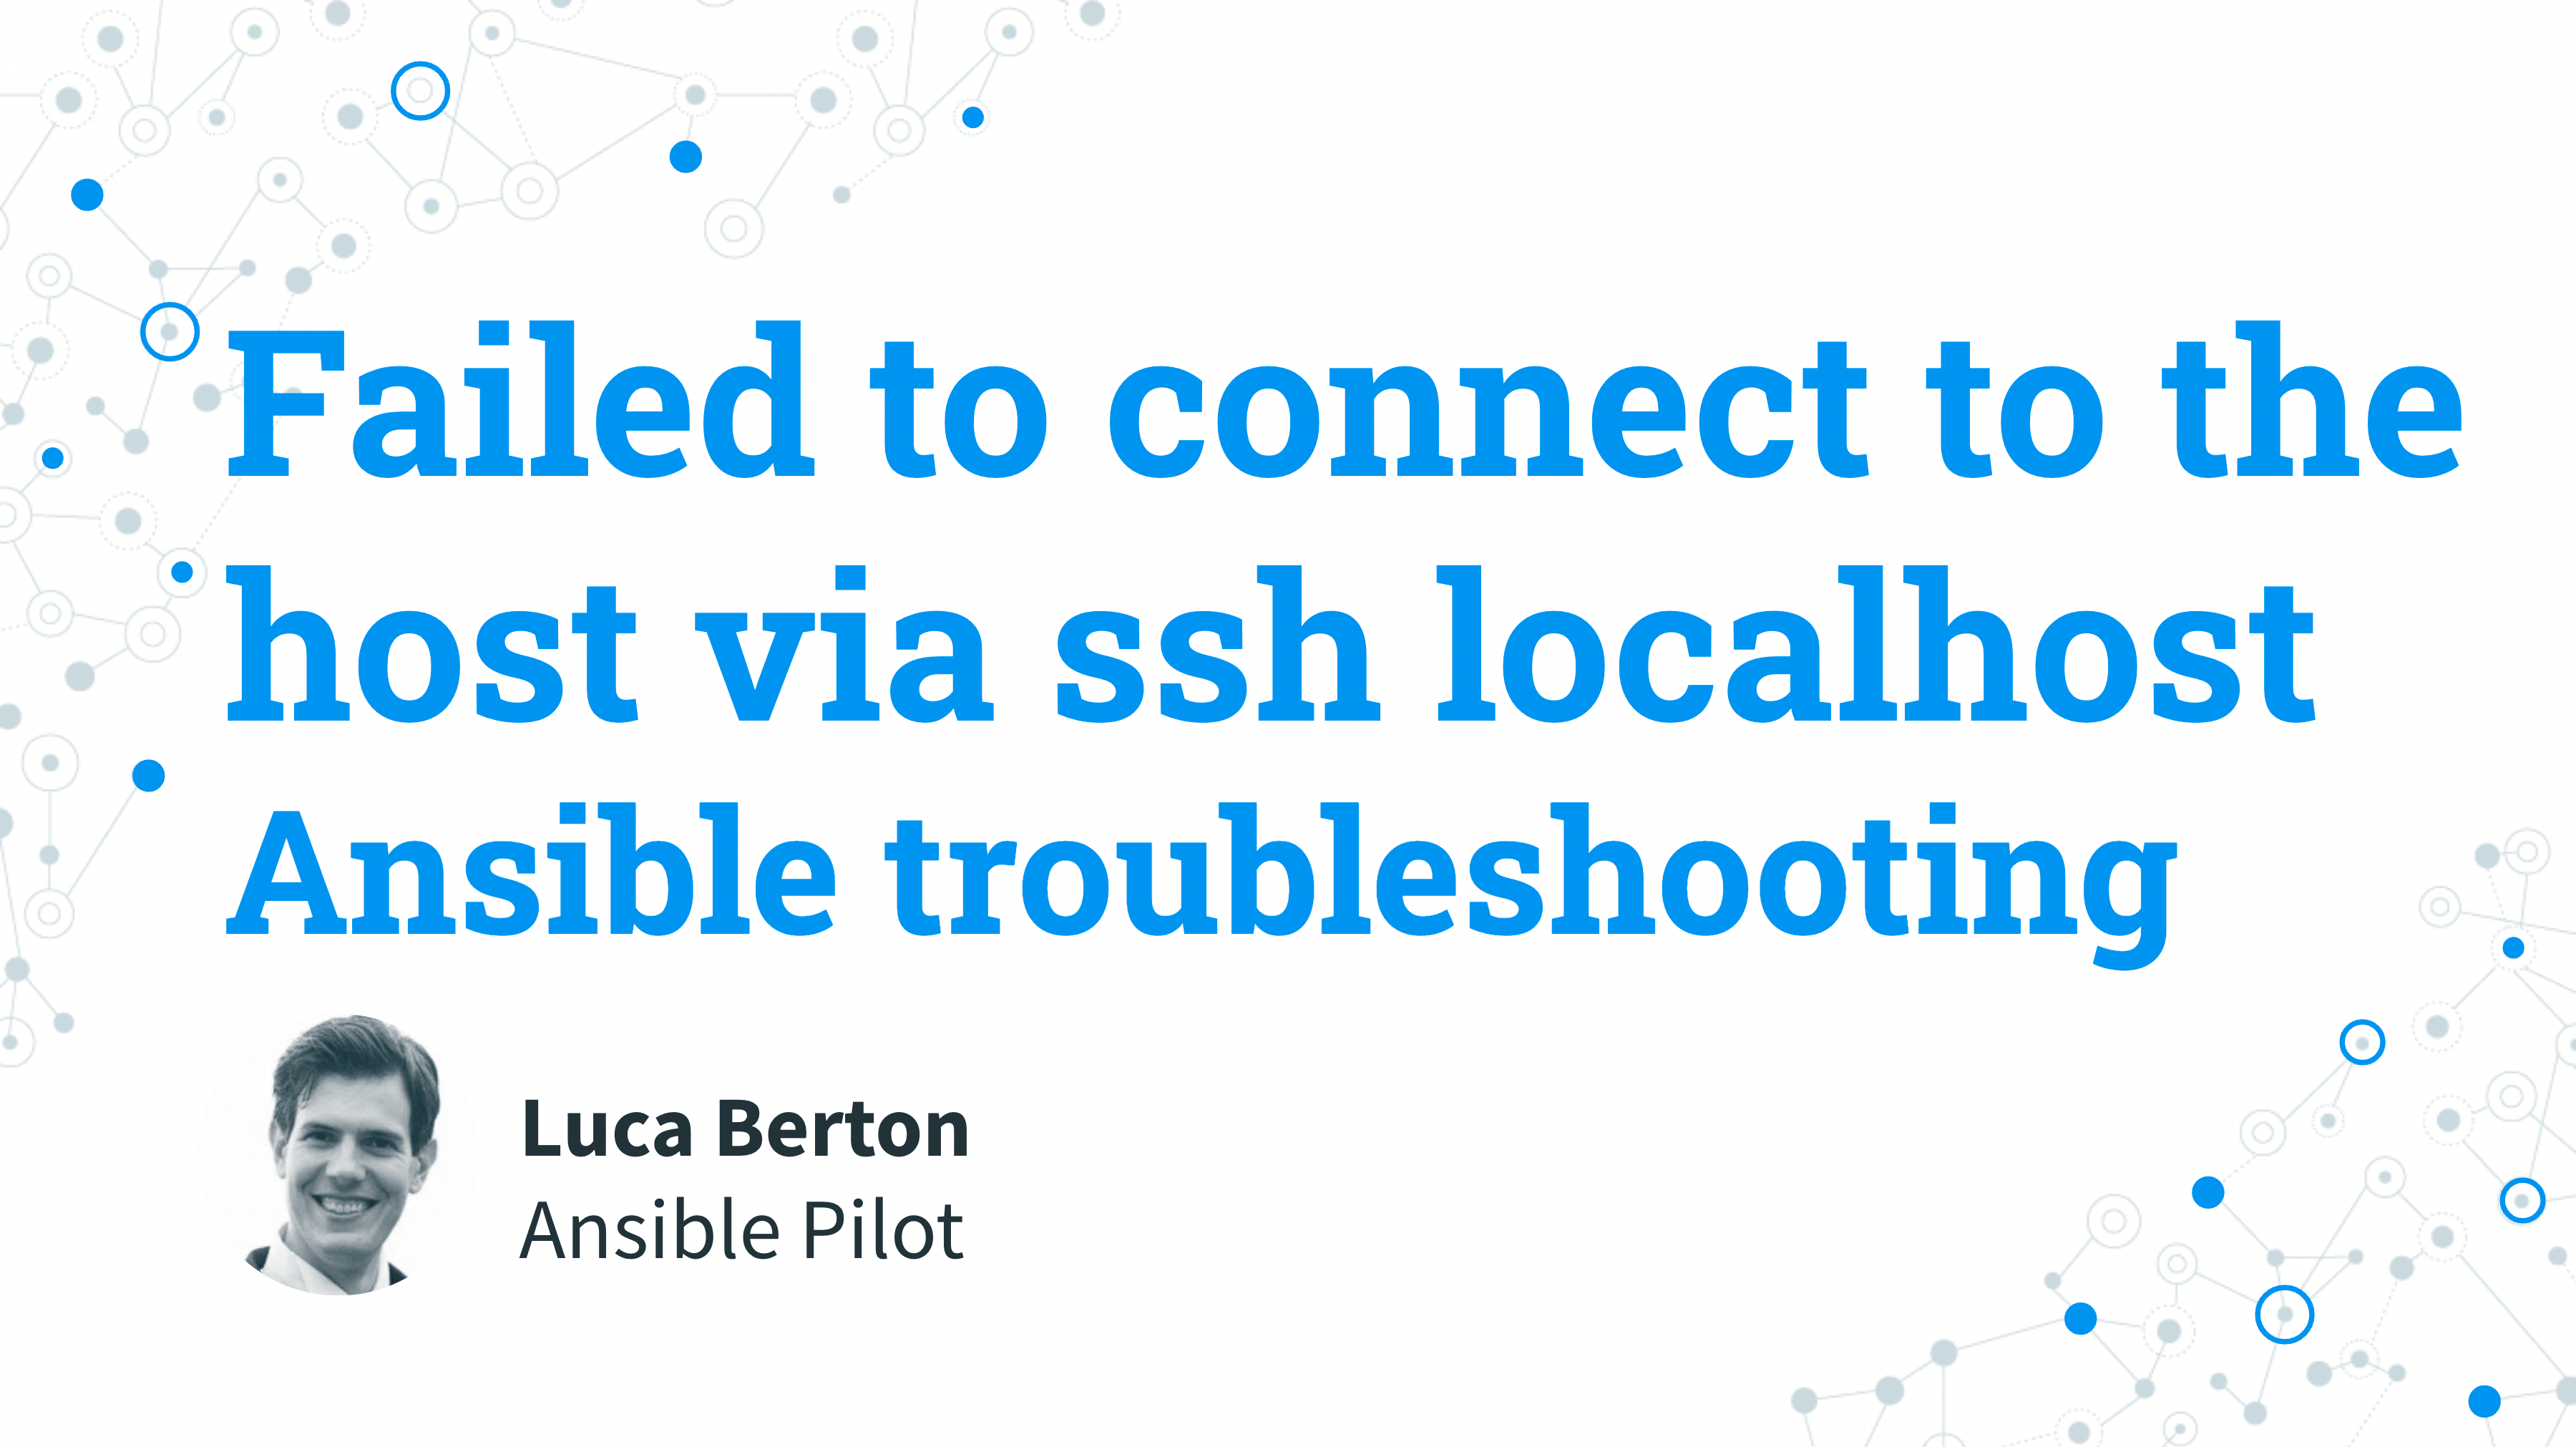 Ansible troubleshooting - Failed to connect to the host via ssh host localhost port 22